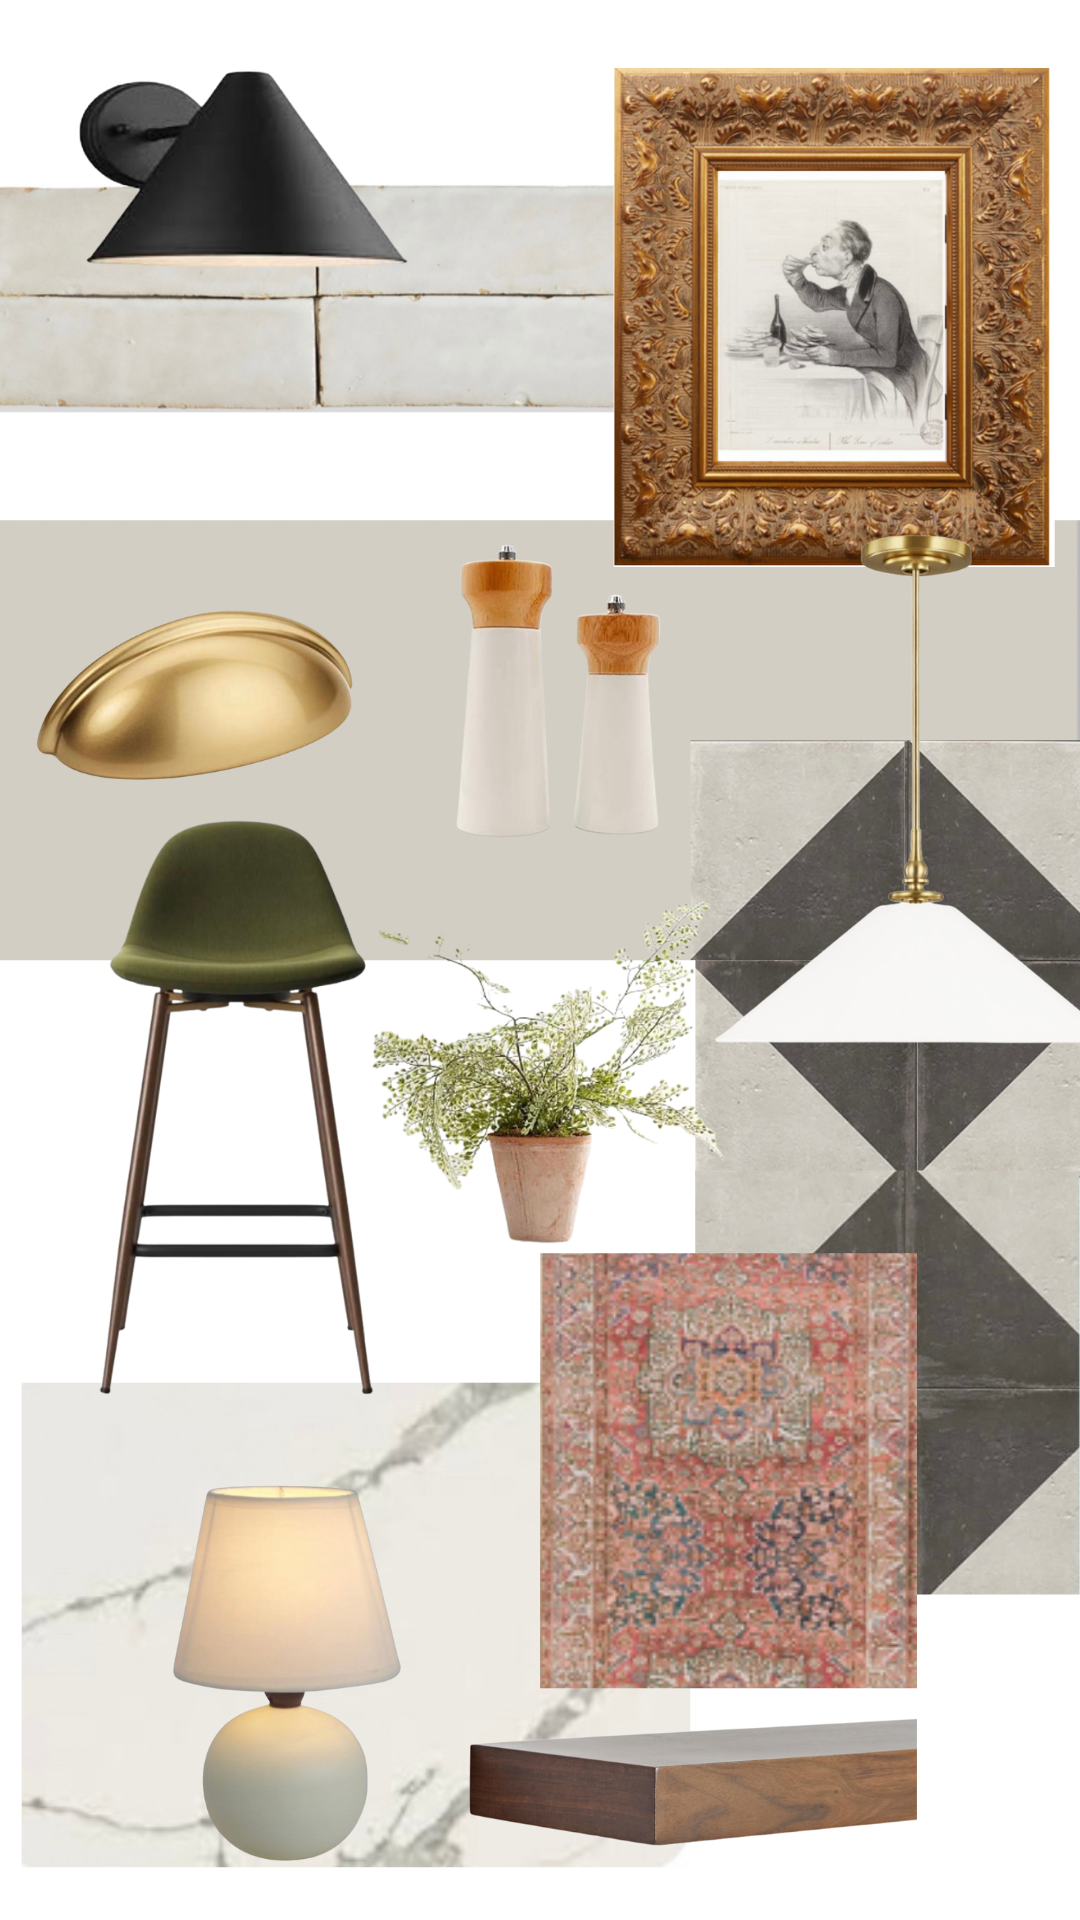 mood board for the kitchen renovation